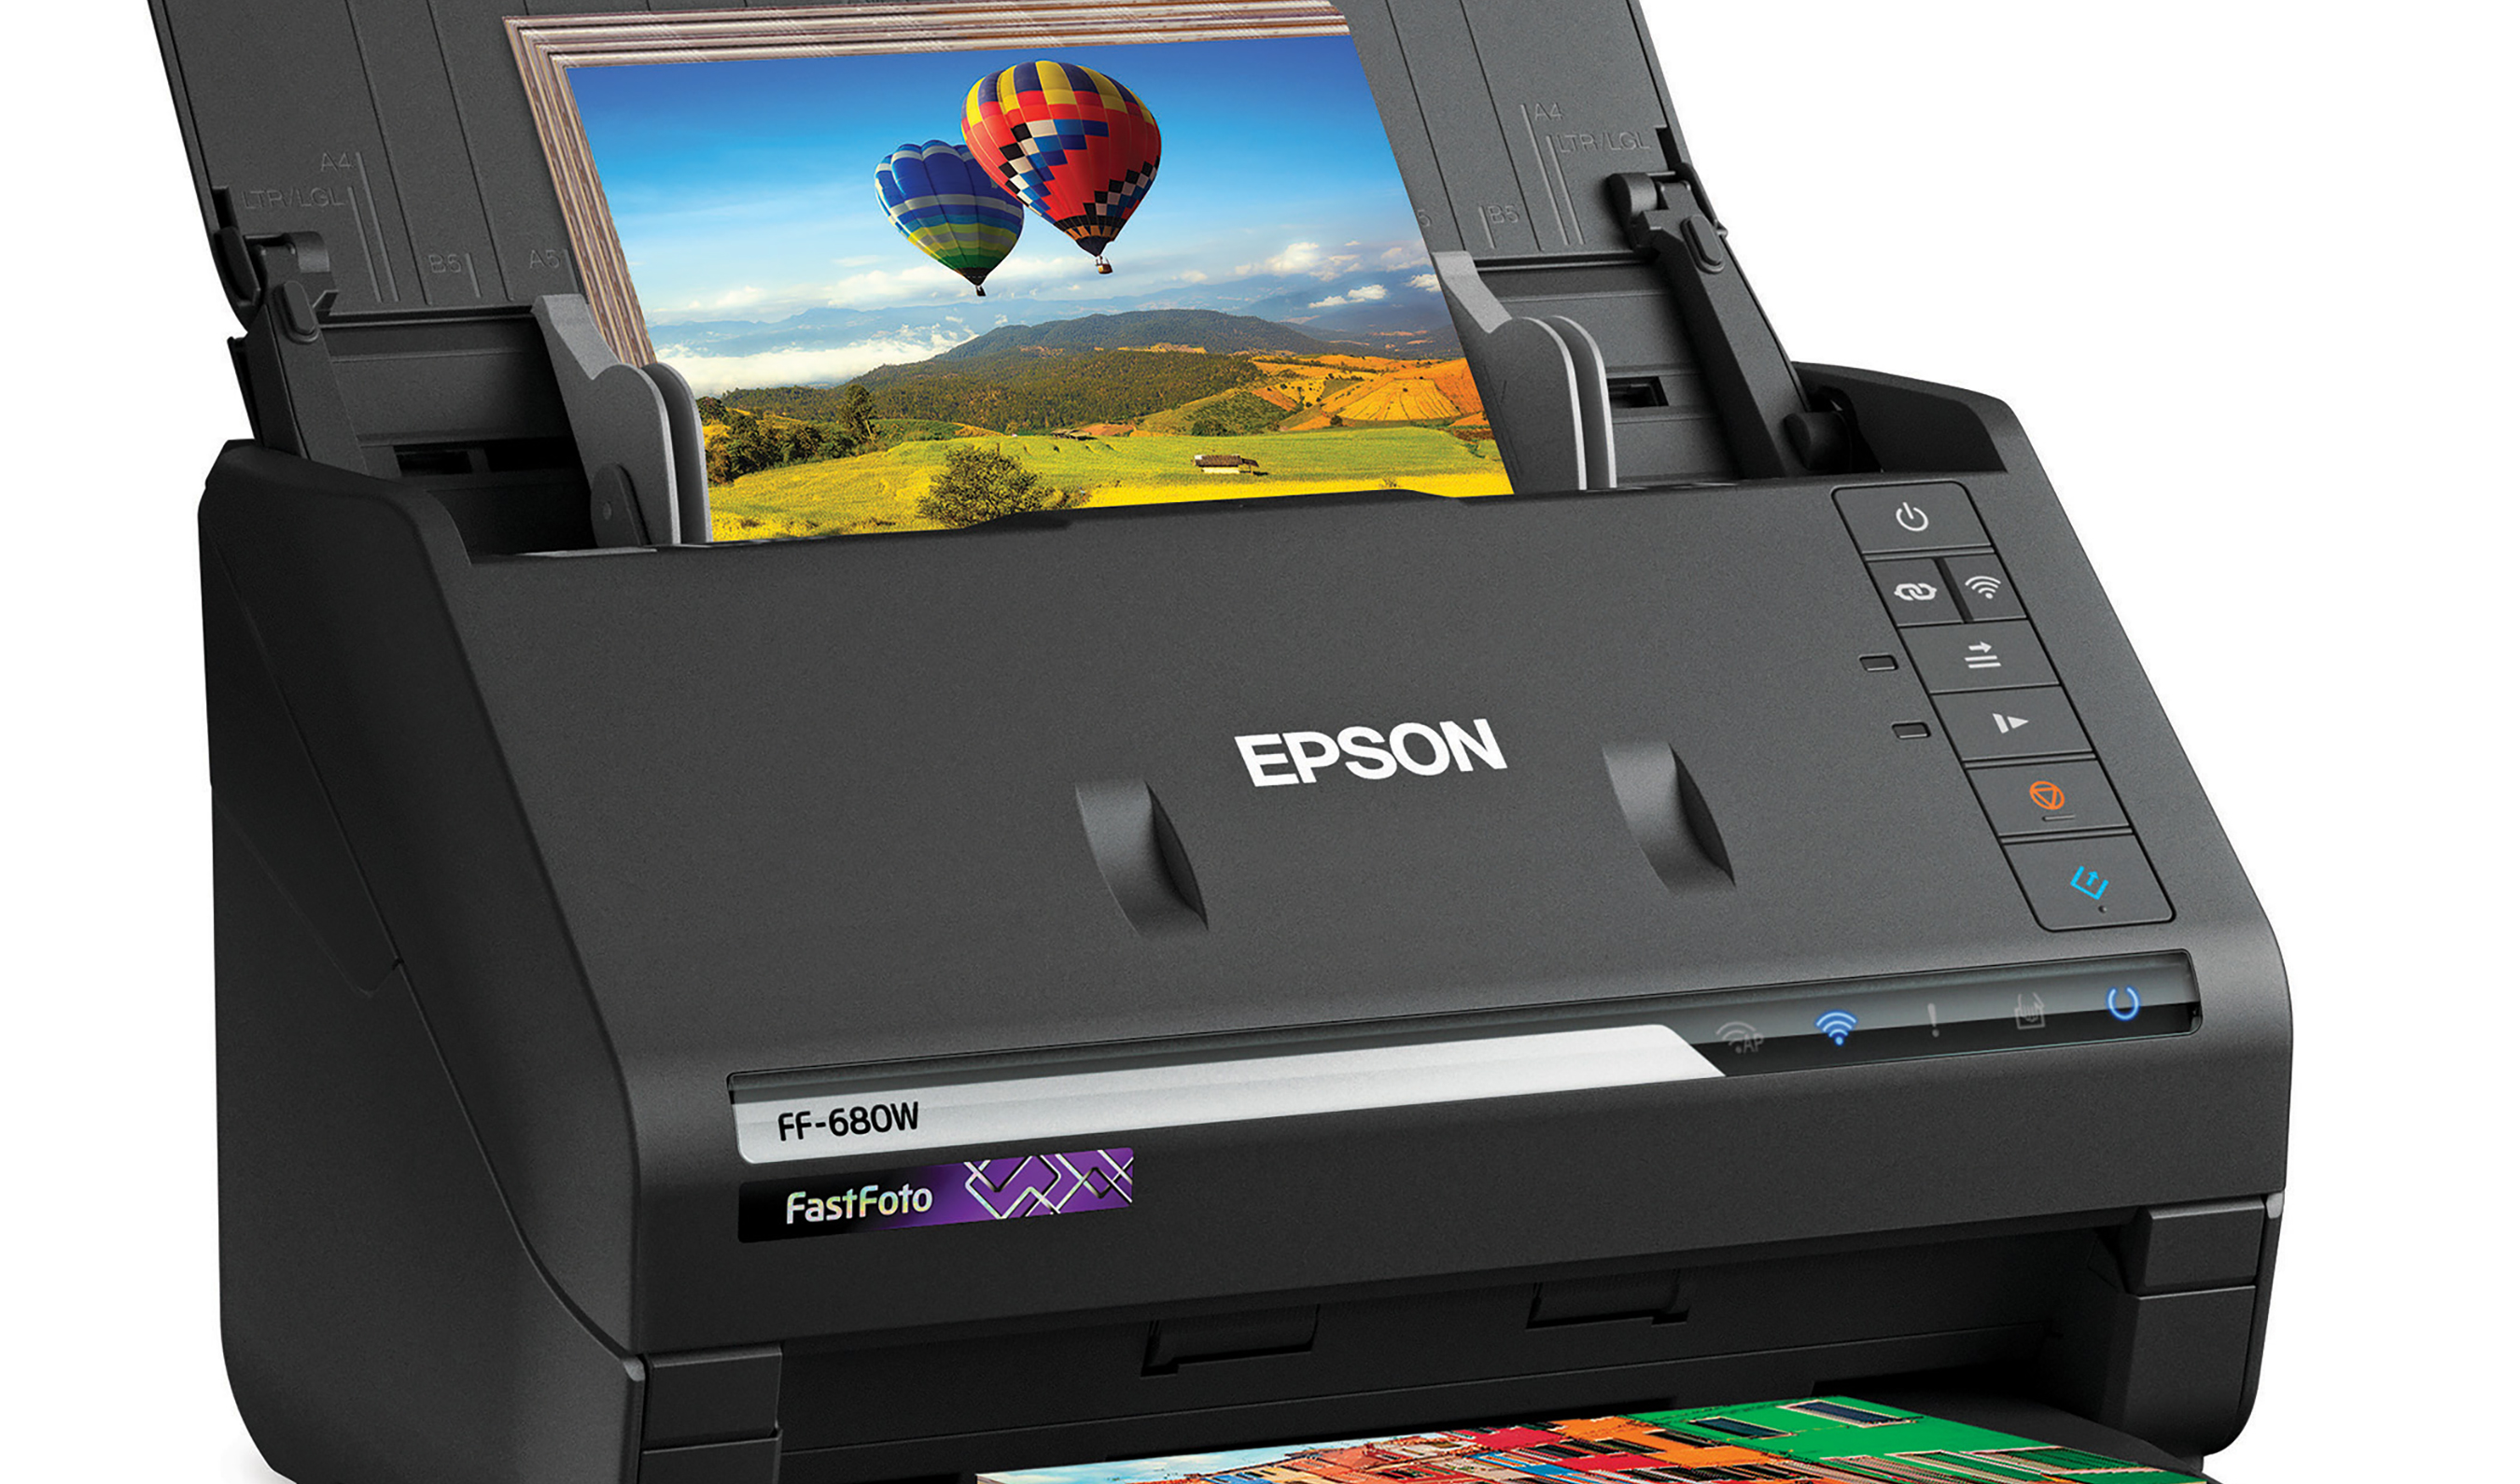 Quickly scan thousands of photos with the Epson FastFoto FF-680W wireless photo scanner and easily restore, save, and organize old photos, postcards, panoramas, and documents.